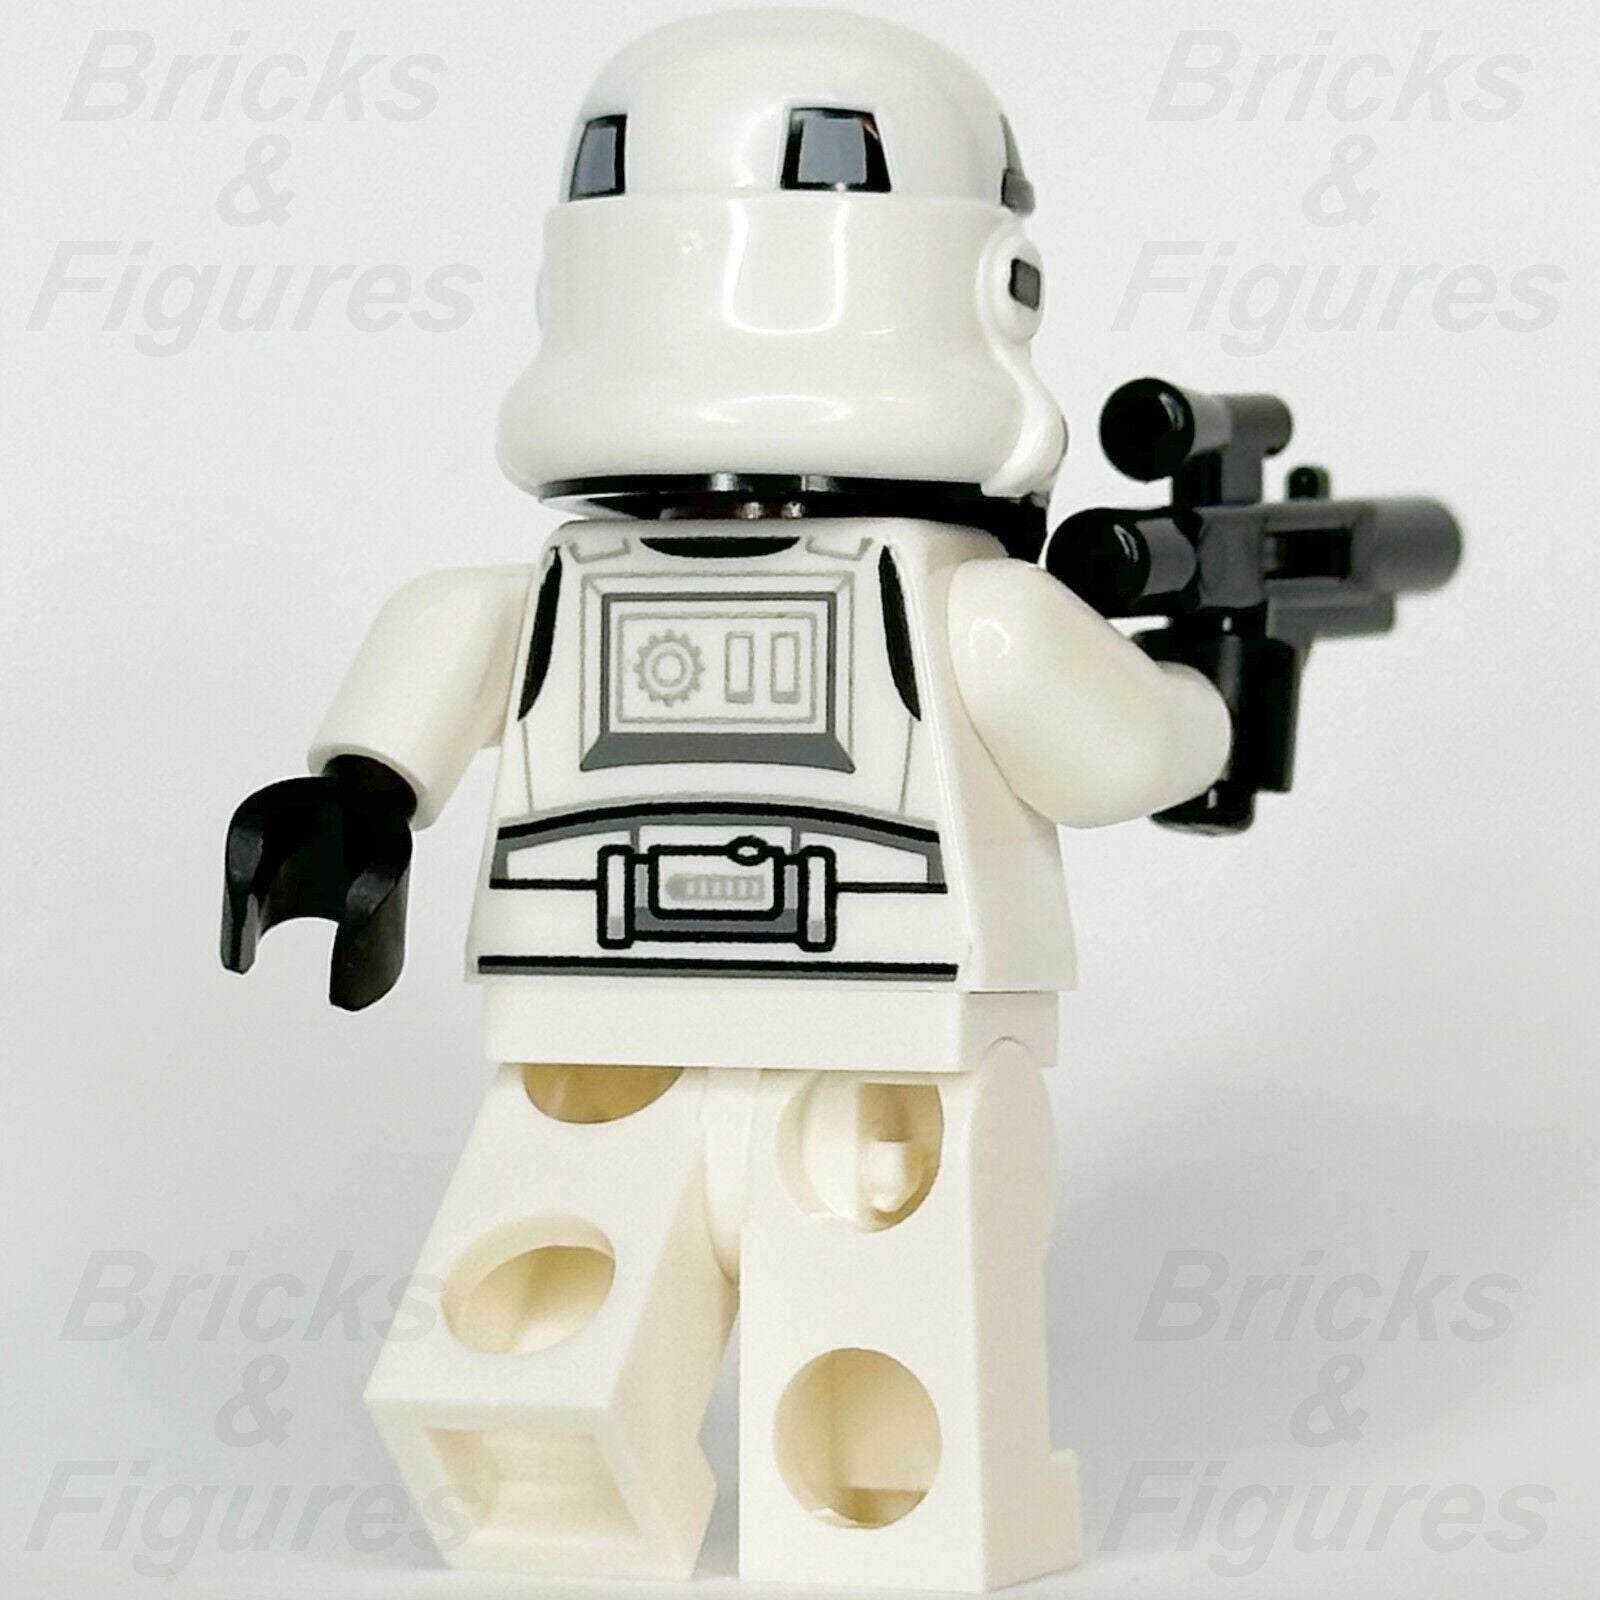 LEGO Star Wars Imperial Stormtrooper Minifigure A New Hope Female 75387 sw1328